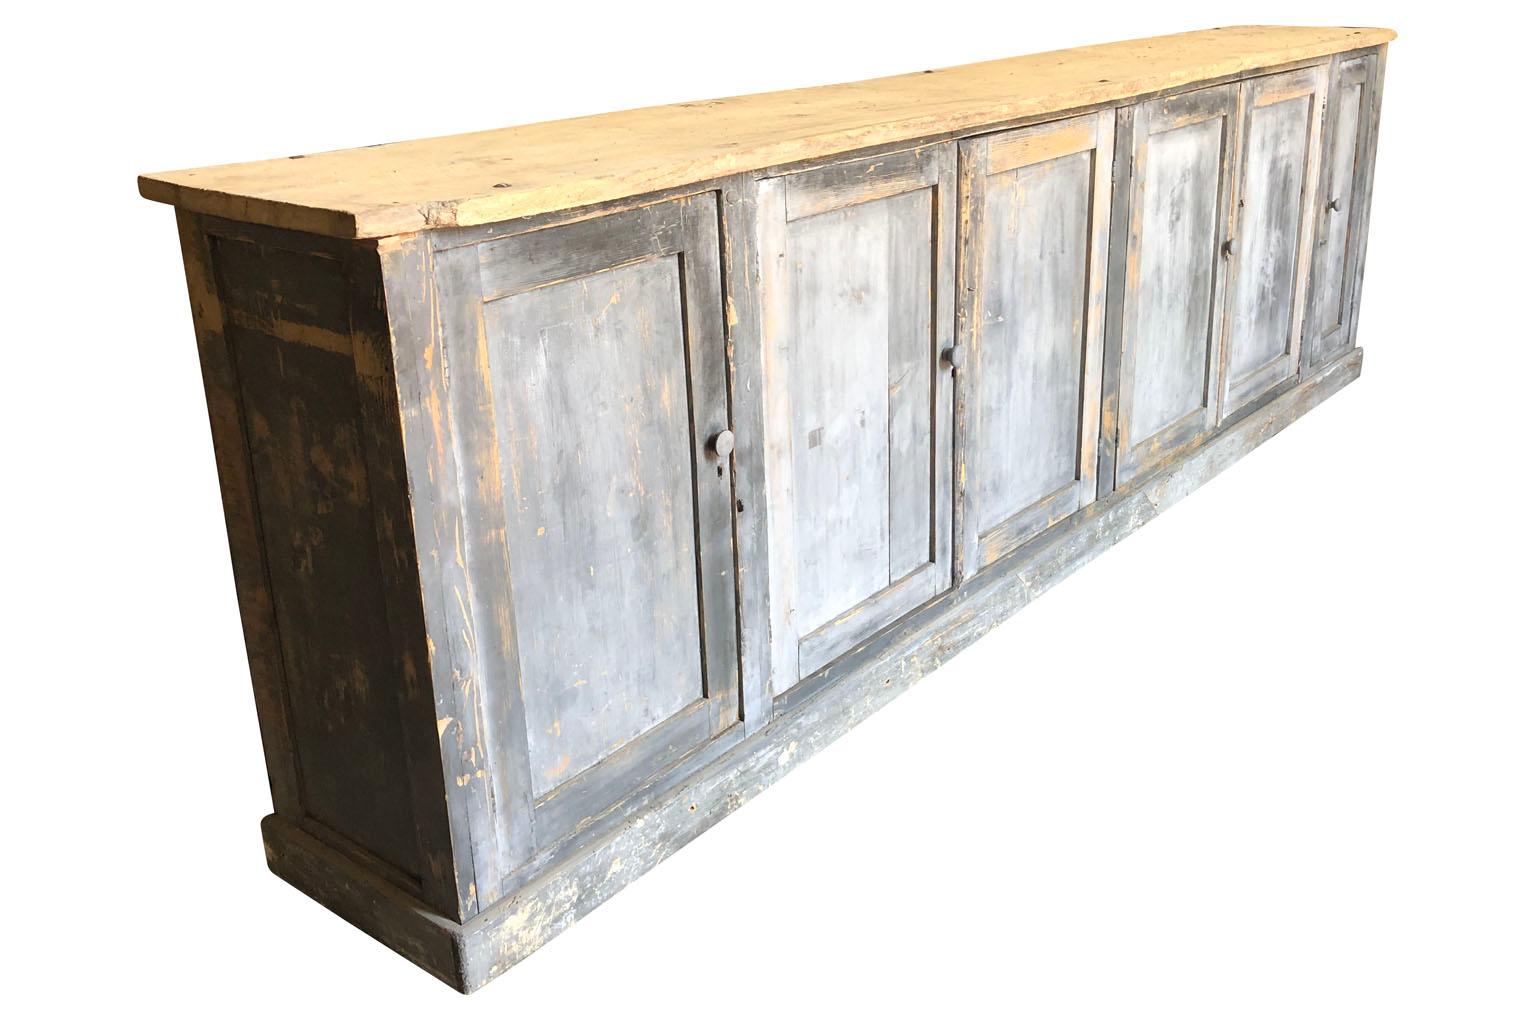 A very handsome later 19th century Enfilade - Buffet from the South of France. Soundly constructed from painted wood with 6 doors and interior shelving. Terrific patina. Wonderful narrow depth.